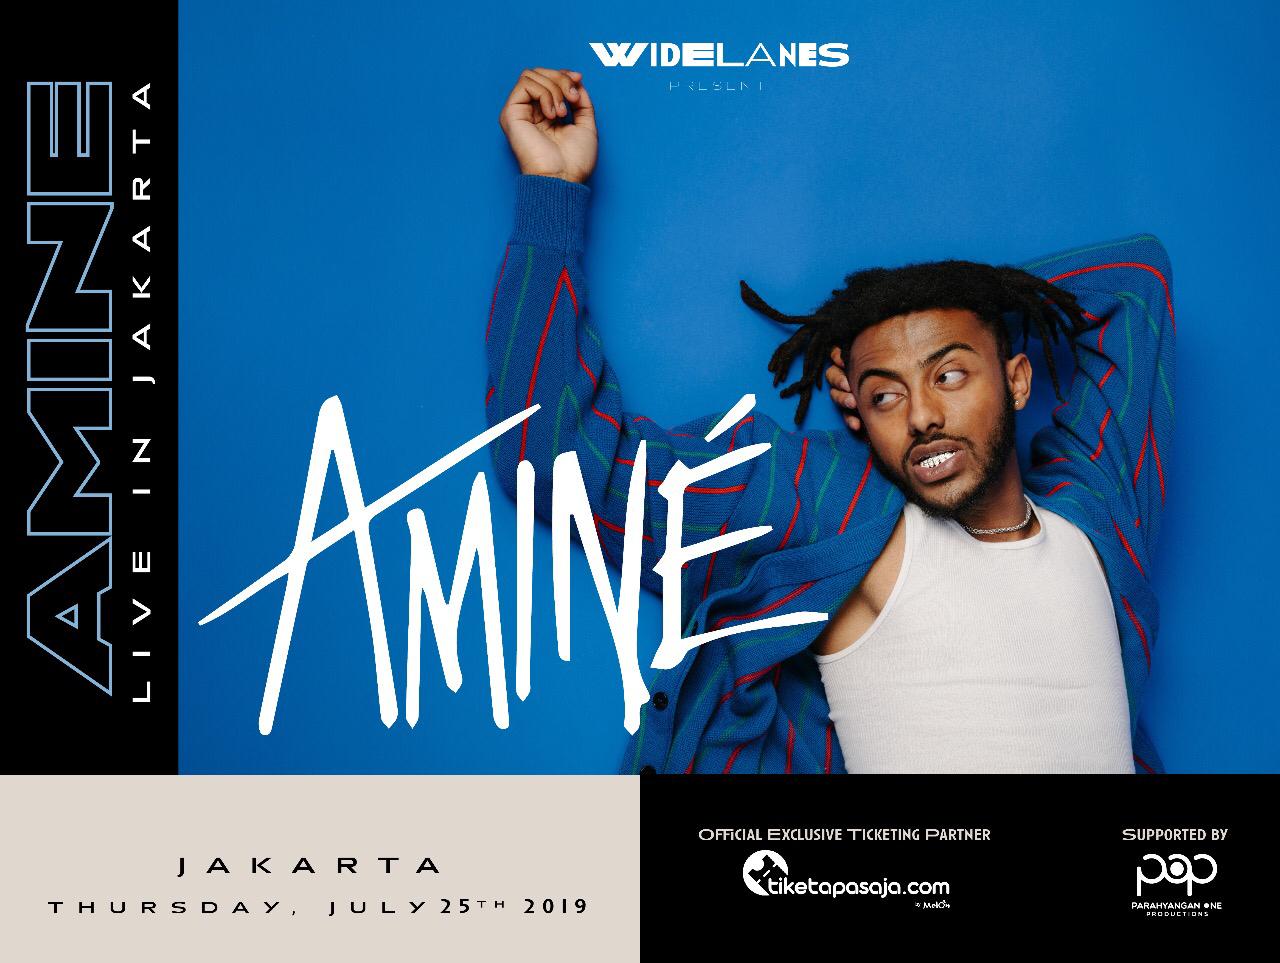 AMINE LIVE IN JAKARTA JULY 25TH 2019!